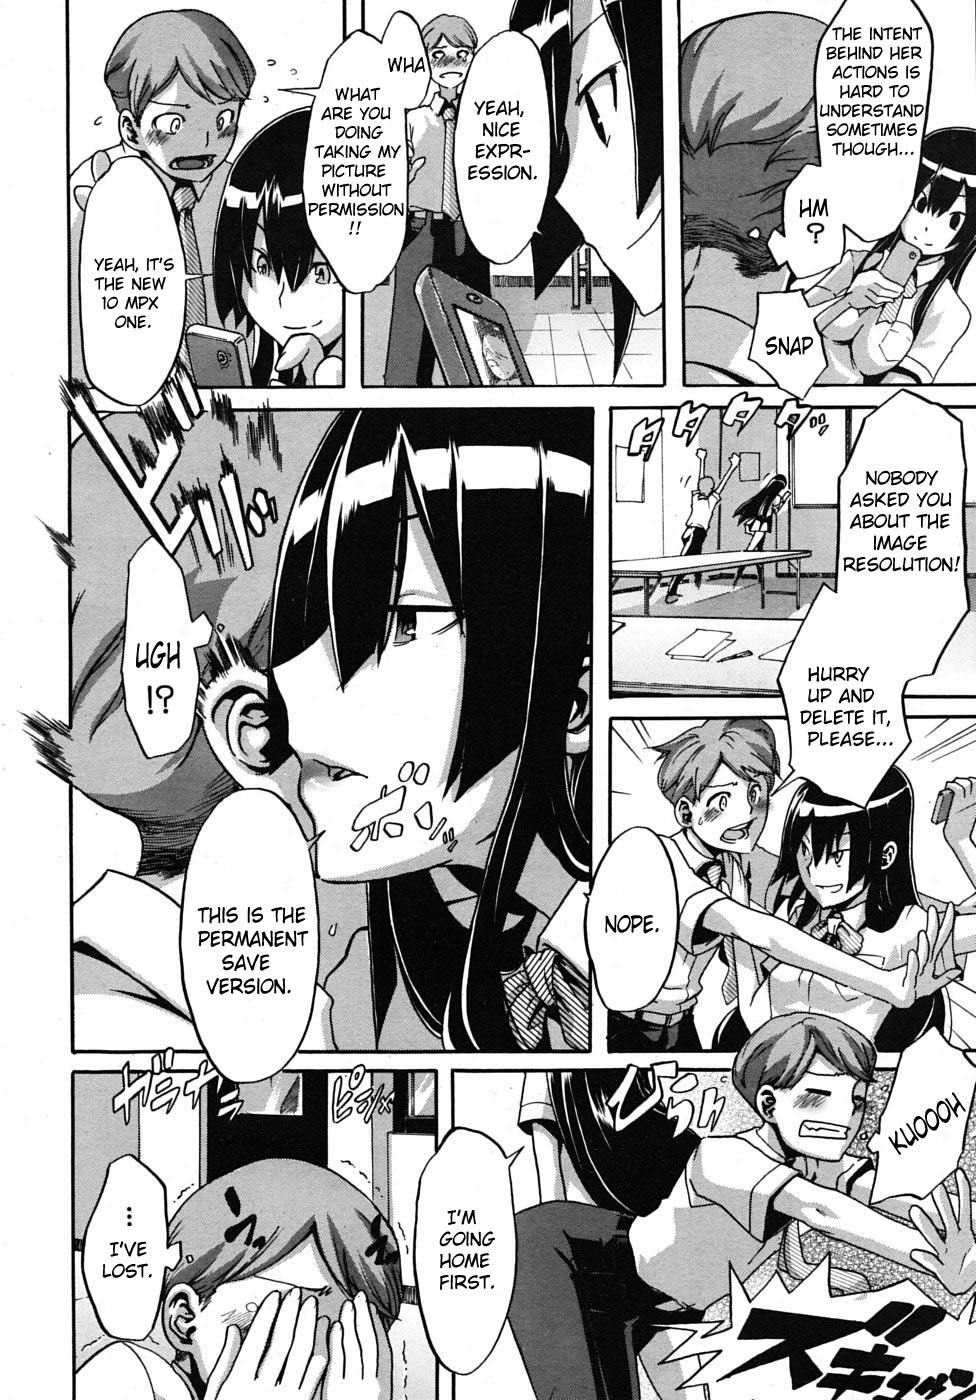 Vaginal Seito Kaichou wa Aisare-kei | The Student Council President Is Loved 18 Porn - Page 6